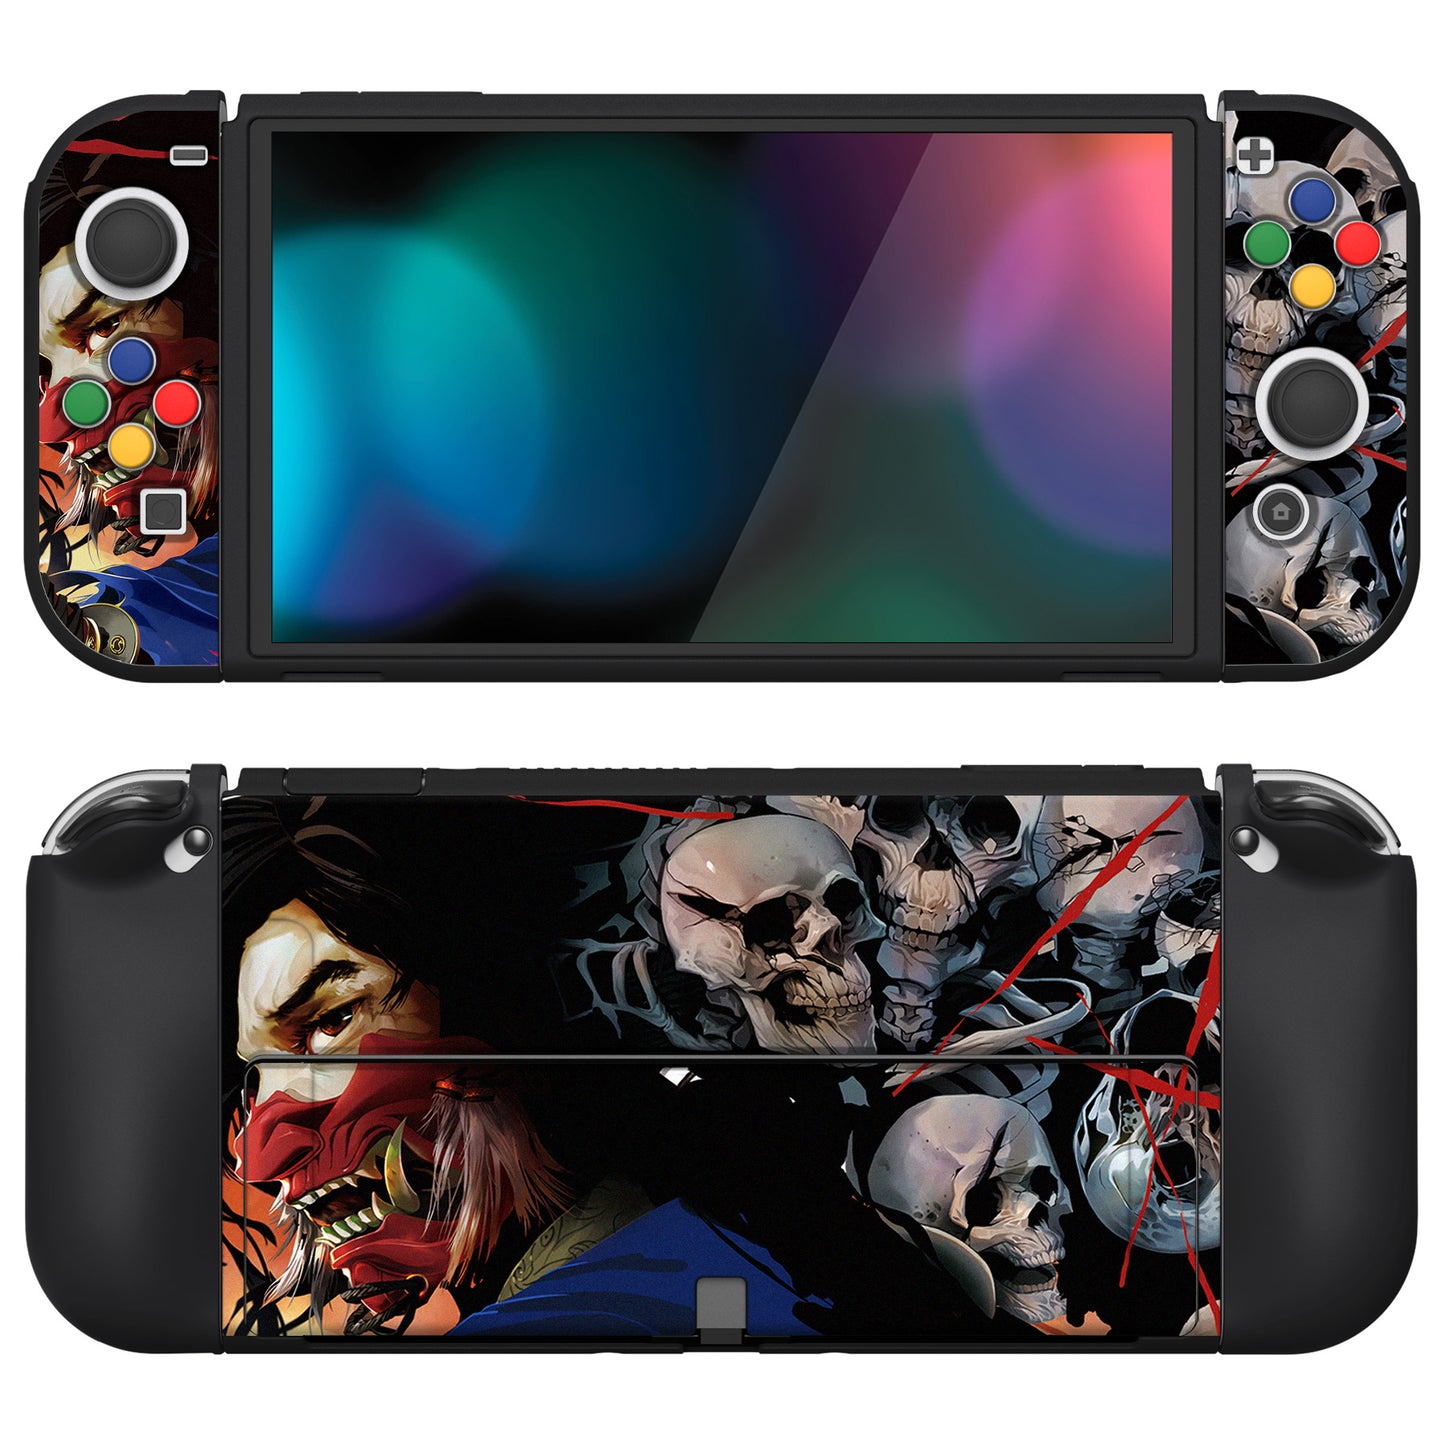 PlayVital ZealProtect Soft Protective Case for Switch OLED, Flexible Protector Joycon Grip Cover for Switch OLED with Thumb Grip Caps & ABXY Direction Button Caps - XSOYV6032 - XSOYV6032 playvital